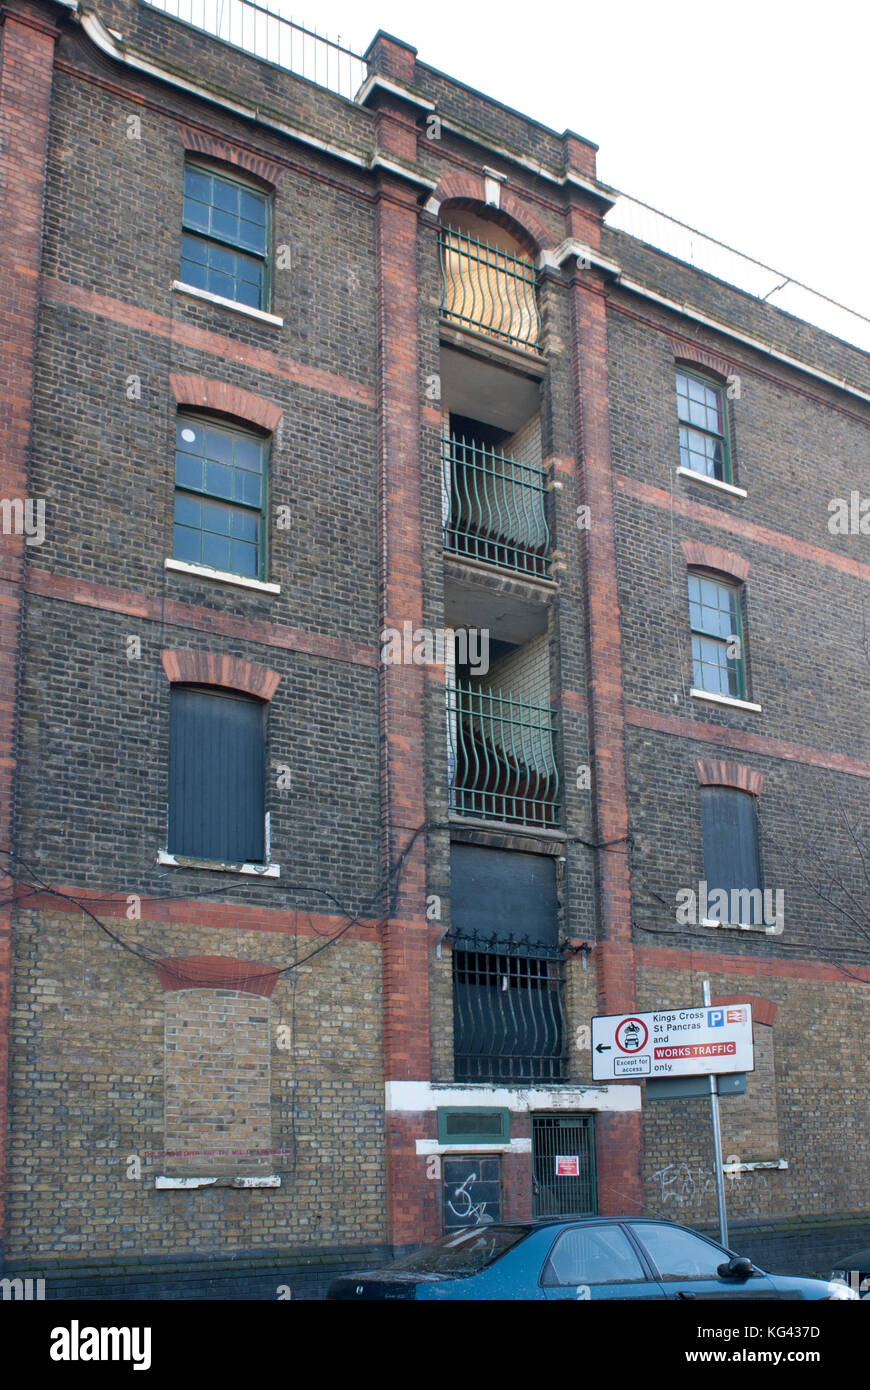 Stanley Buildings (1865), King's Cross, shortly before demolition in 2007, social housing built by the Industrial Dwellings Society. Stock Photo